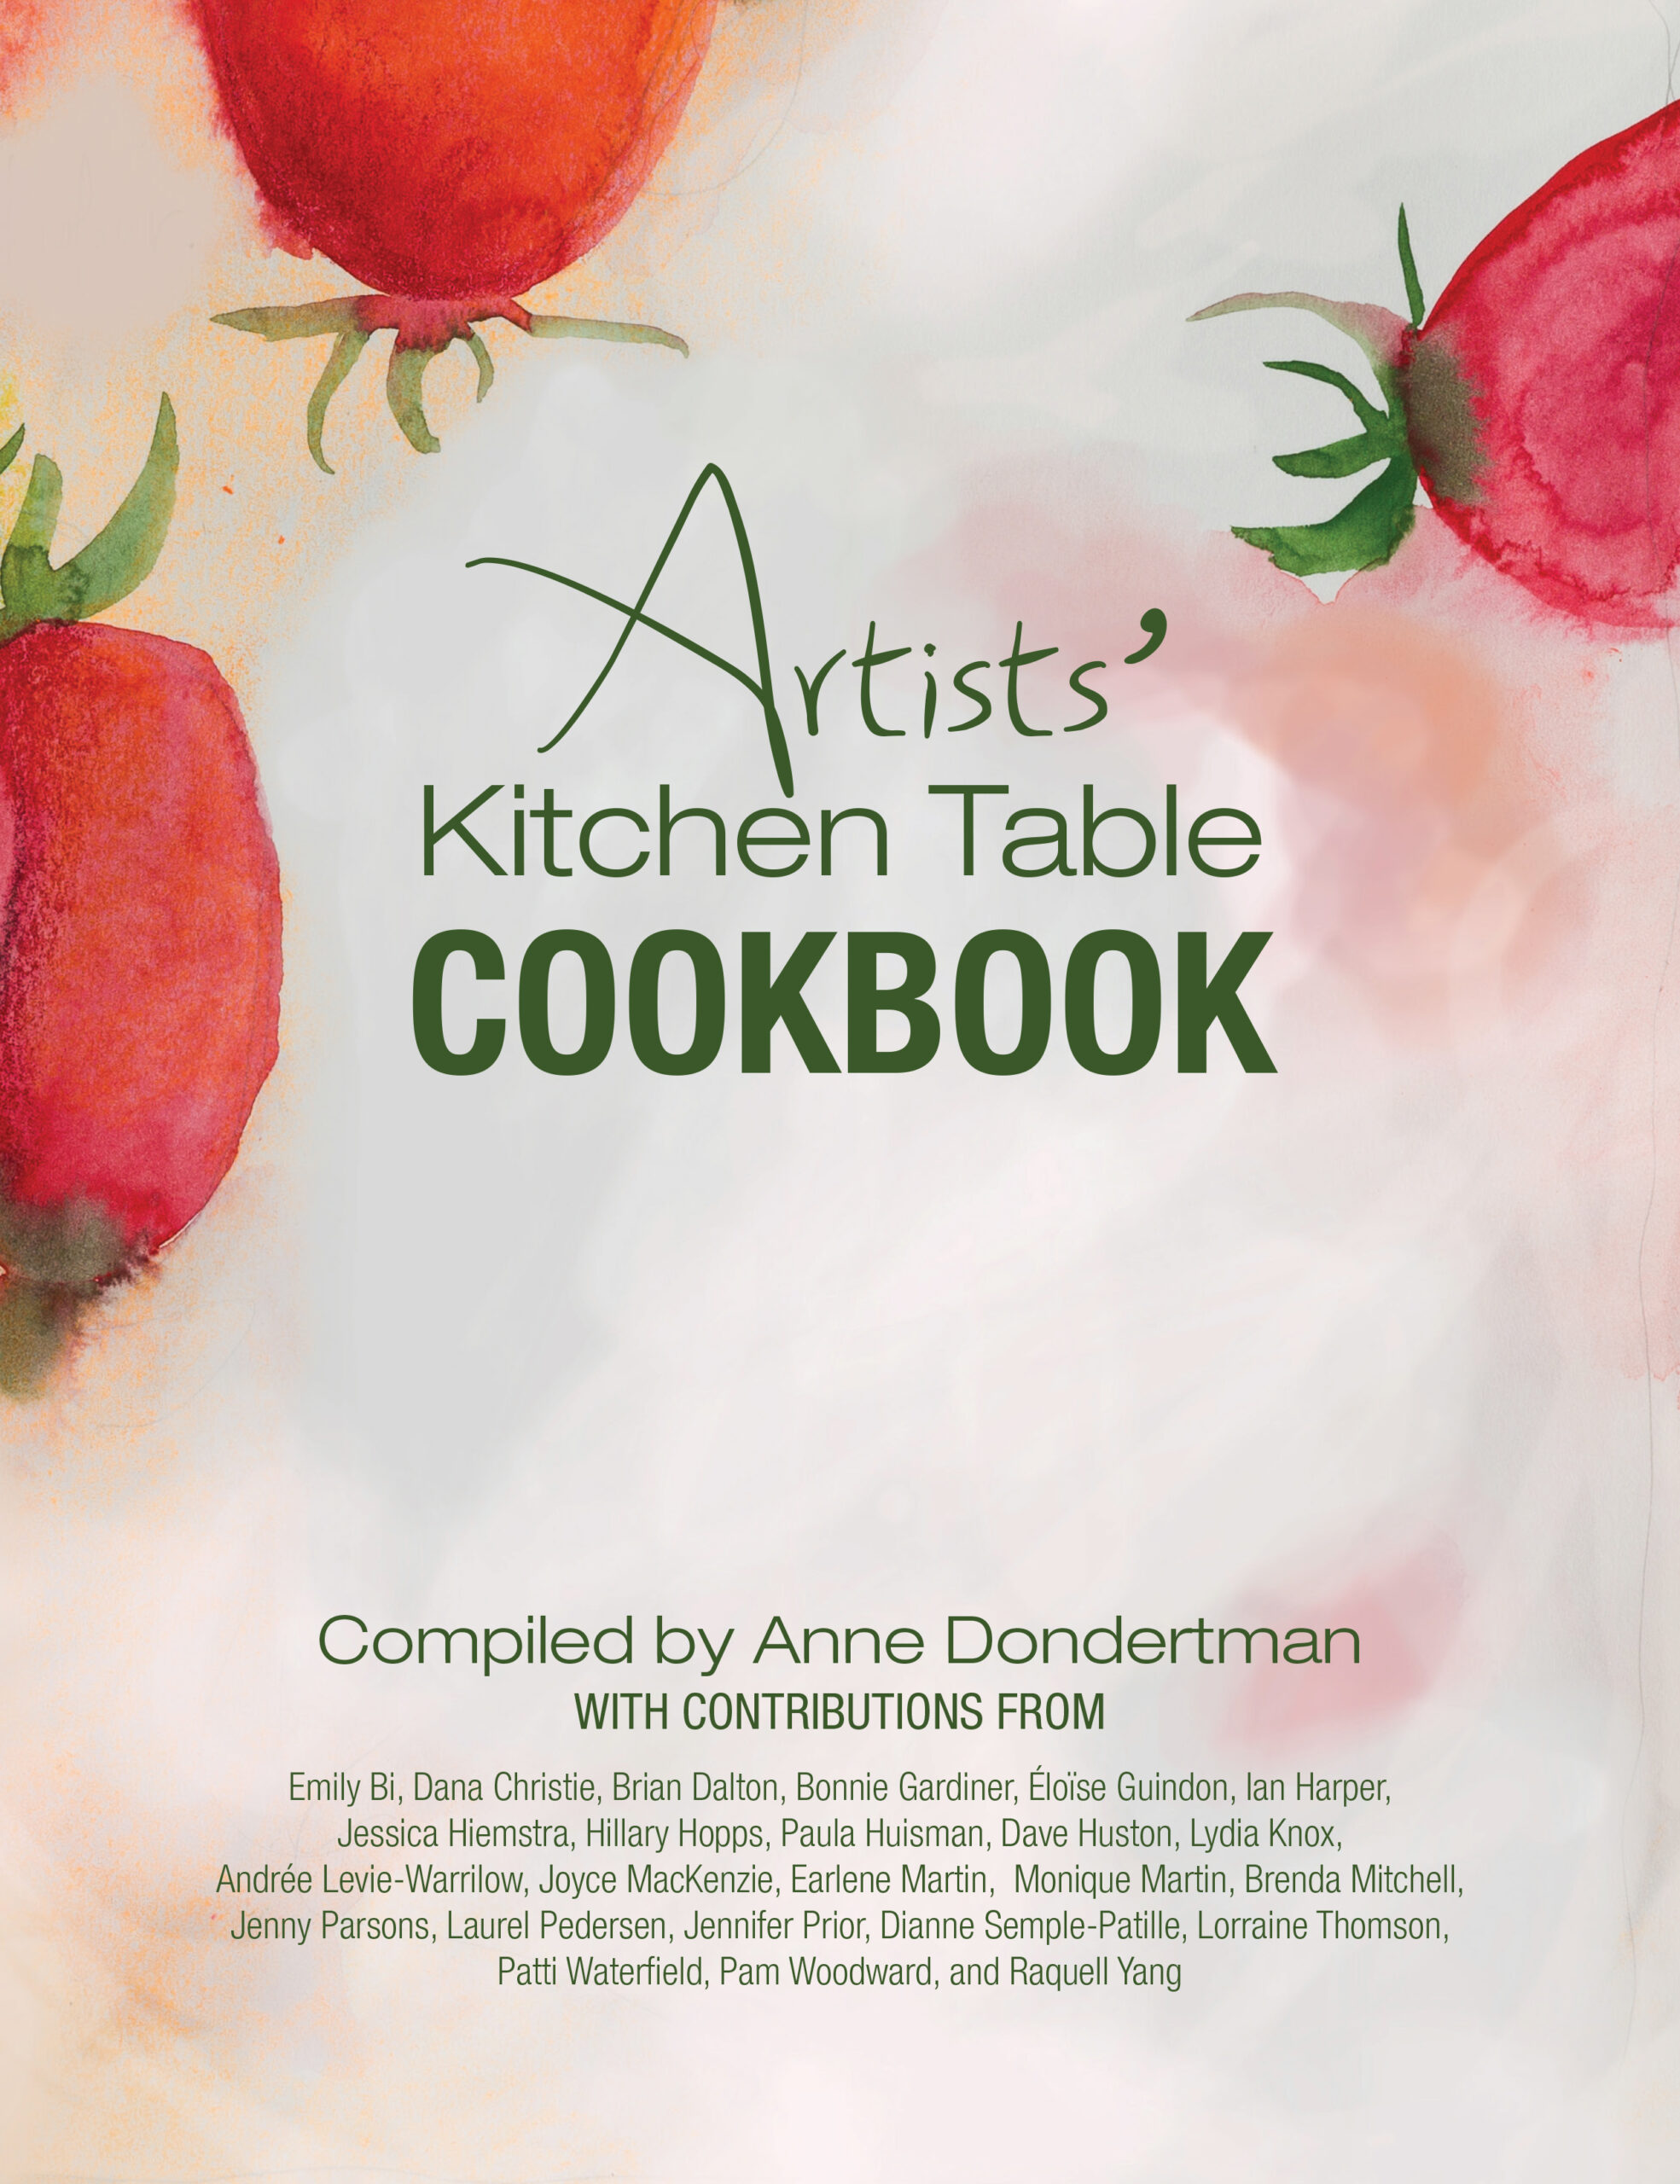 Artists' Kitchen Table Cookbook compiled by Anne Dondertman